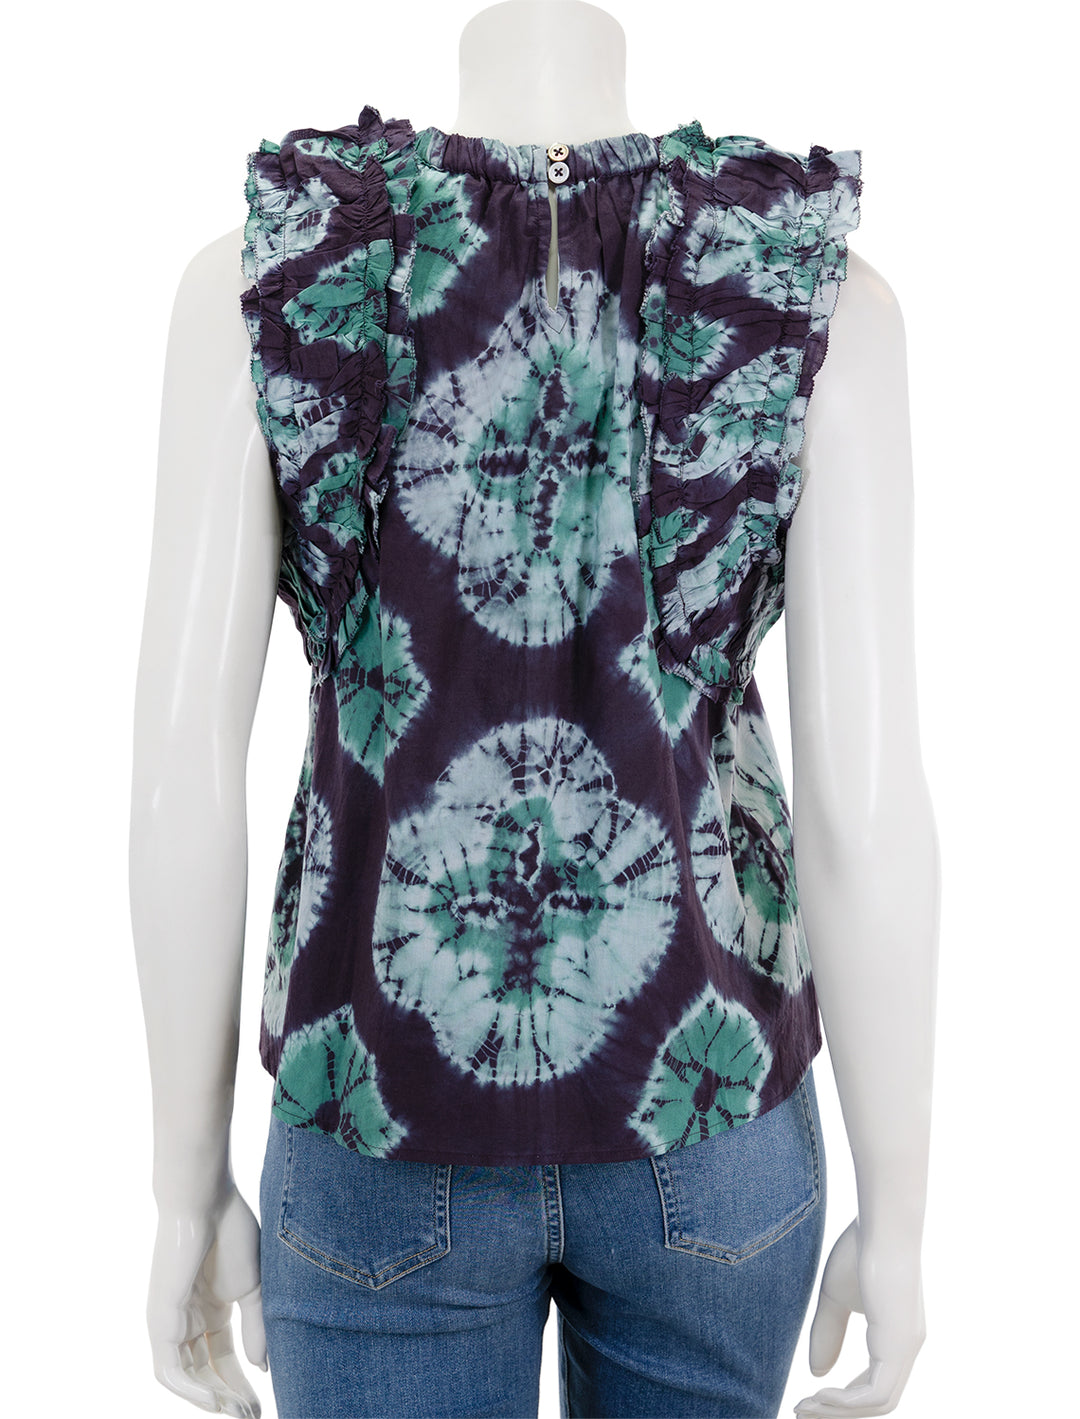 Back view of Sea NY's Aveline Tie Dye Print Pintucked Tank Top in Teal.